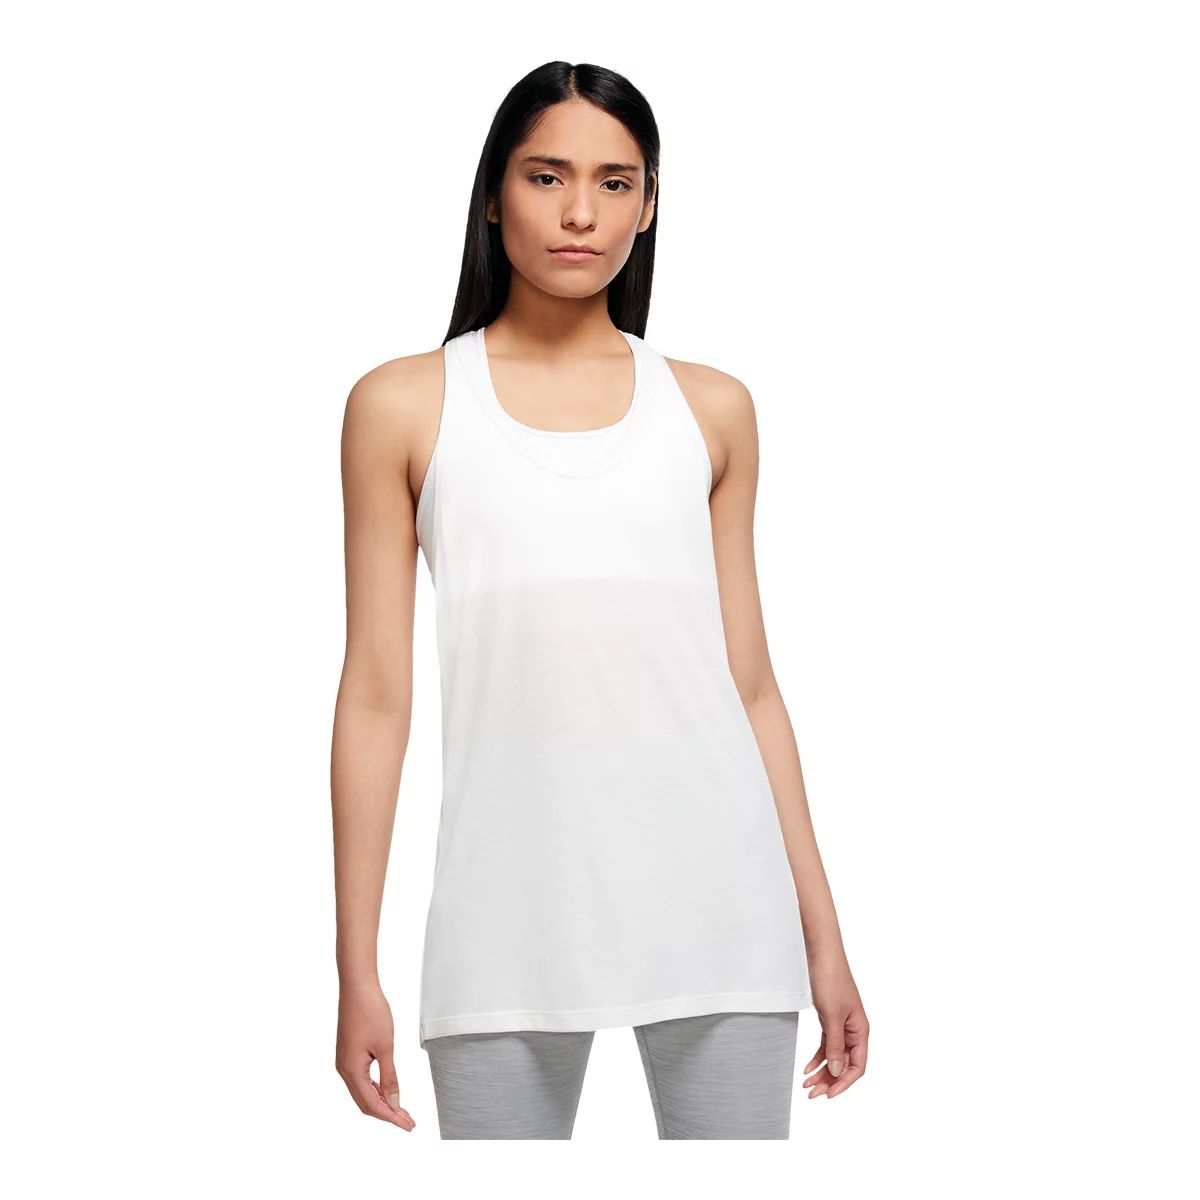 https://media-www.atmosphere.ca/product/div-03-softgoods/dpt-70-athletic-clothing/sdpt-02-womens/333474087/nike-w-yoga-novelty-tank-q32-sail-xs--32d2b01e-26af-4a37-81b6-95b67572877c-jpgrendition.jpg